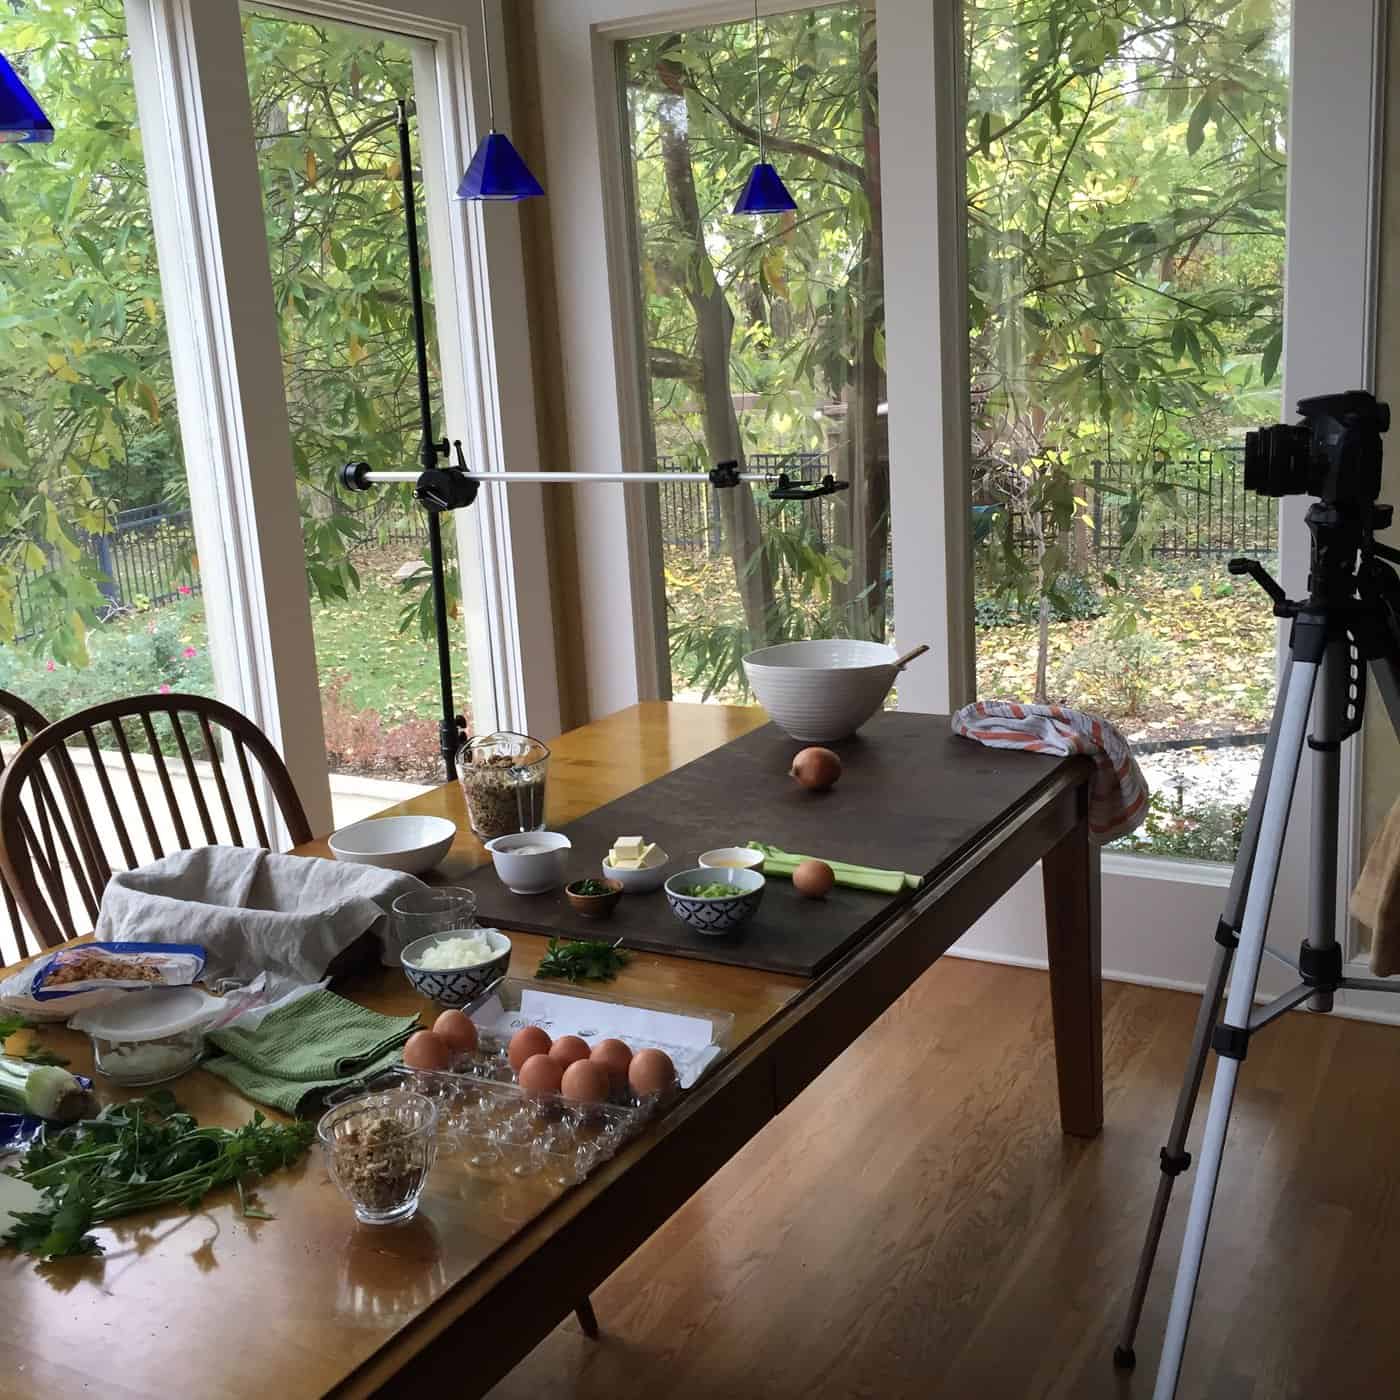 Making of a Food Blog Video